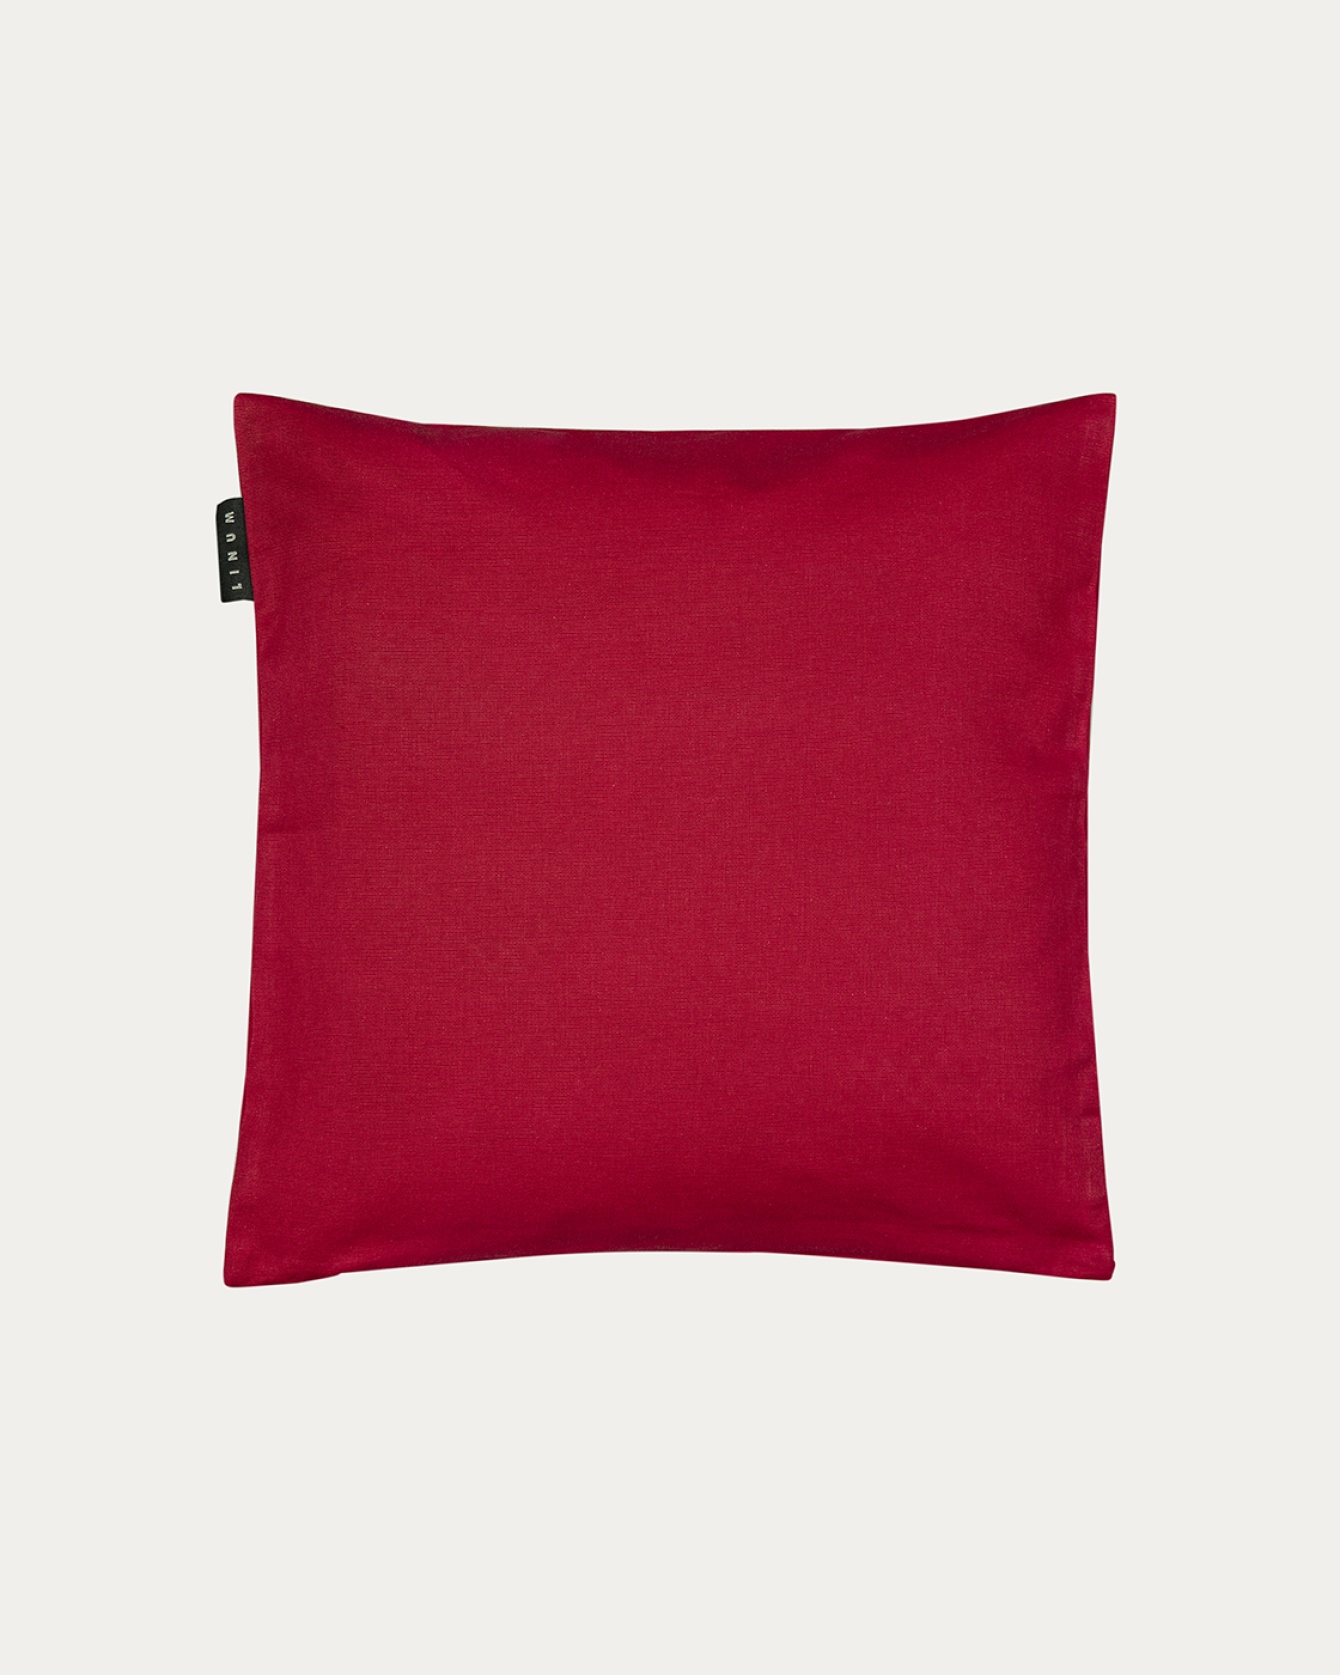 Product image red ANNABELL cushion cover made of soft cotton from LINUM DESIGN. Size 40x40 cm.